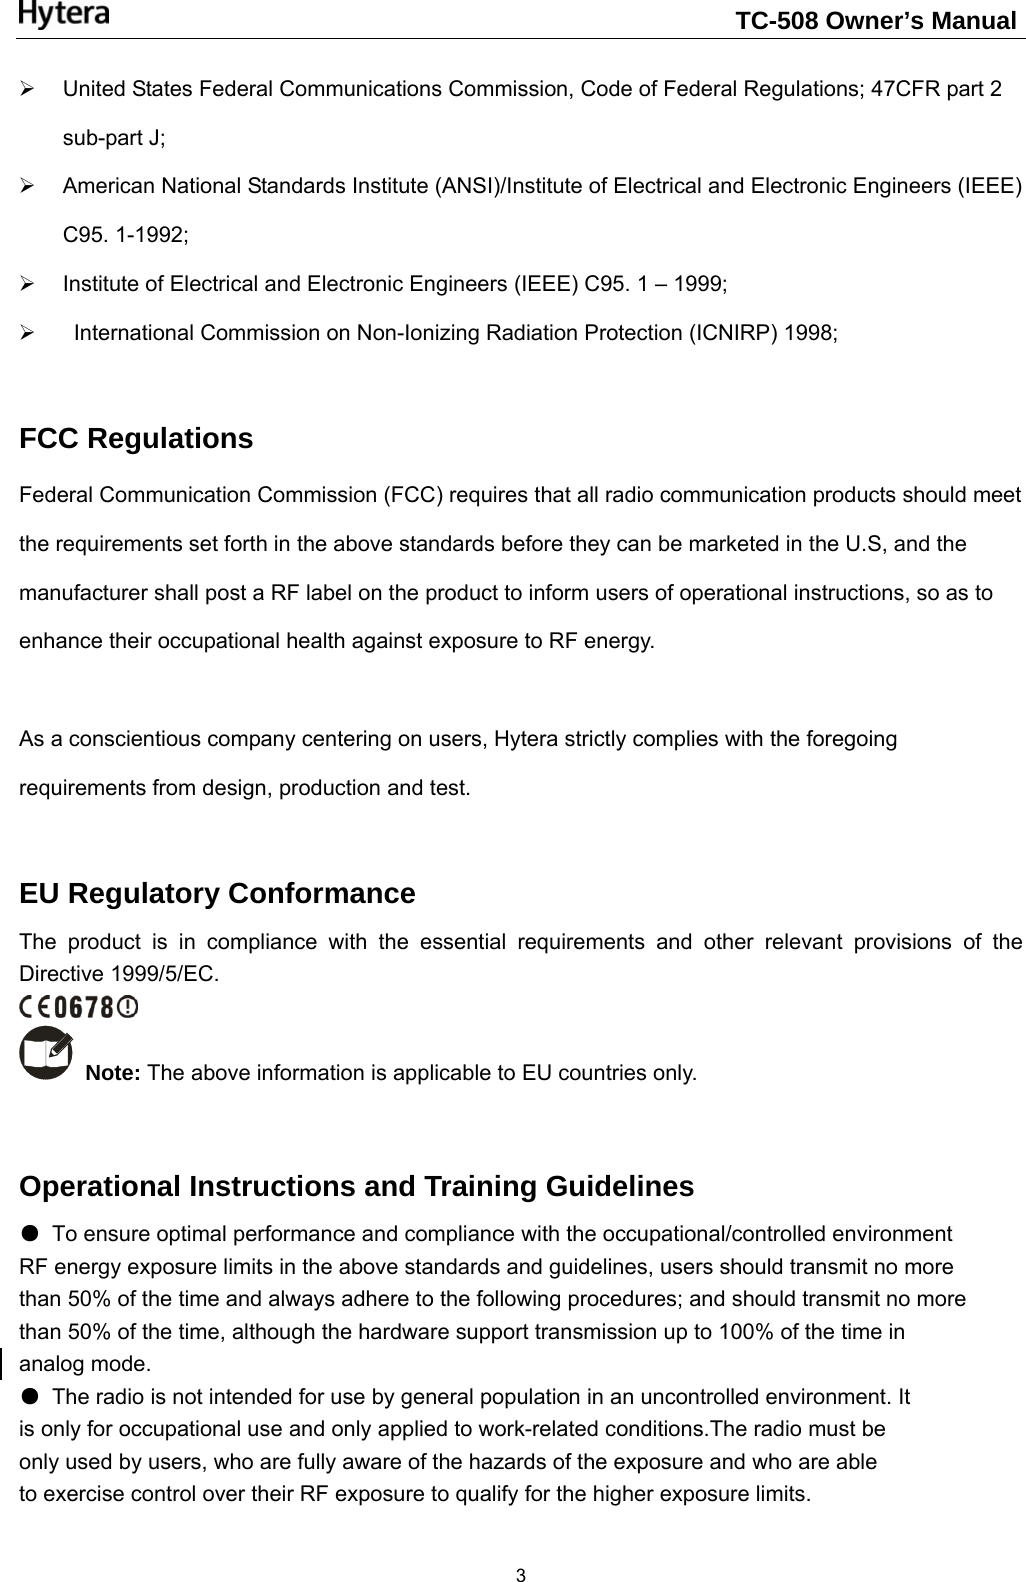                                                                    TC-508 Owner’s Manual  3¾  United States Federal Communications Commission, Code of Federal Regulations; 47CFR part 2 sub-part J;   ¾  American National Standards Institute (ANSI)/Institute of Electrical and Electronic Engineers (IEEE) C95. 1-1992;   ¾  Institute of Electrical and Electronic Engineers (IEEE) C95. 1 – 1999;   ¾    International Commission on Non-Ionizing Radiation Protection (ICNIRP) 1998;  FCC Regulations Federal Communication Commission (FCC) requires that all radio communication products should meet the requirements set forth in the above standards before they can be marketed in the U.S, and the manufacturer shall post a RF label on the product to inform users of operational instructions, so as to enhance their occupational health against exposure to RF energy.    As a conscientious company centering on users, Hytera strictly complies with the foregoing requirements from design, production and test.    EU Regulatory Conformance The product is in compliance with the essential requirements and other relevant provisions of the Directive 1999/5/EC.   Note: The above information is applicable to EU countries only.  Operational Instructions and Training Guidelines ●  To ensure optimal performance and compliance with the occupational/controlled environment RF energy exposure limits in the above standards and guidelines, users should transmit no more than 50% of the time and always adhere to the following procedures; and should transmit no more than 50% of the time, although the hardware support transmission up to 100% of the time in analog mode. ●  The radio is not intended for use by general population in an uncontrolled environment. It is only for occupational use and only applied to work-related conditions.The radio must be only used by users, who are fully aware of the hazards of the exposure and who are able to exercise control over their RF exposure to qualify for the higher exposure limits. 